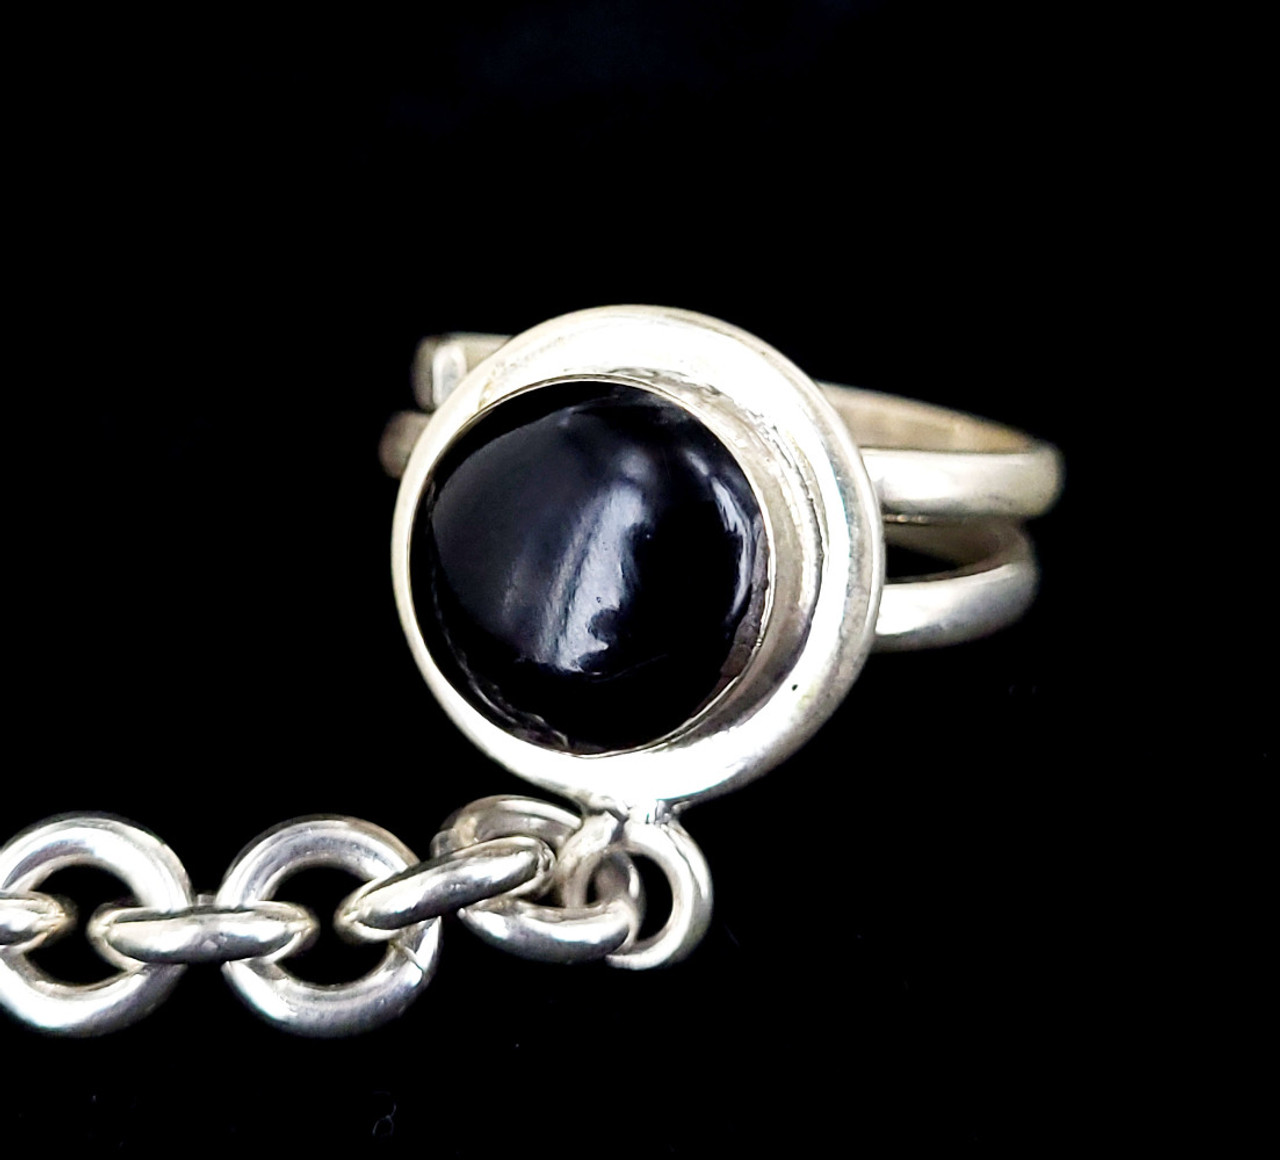 Black Onyx 925 Silver Plated Ethnic Handmade Jewelry Ring US Size 7 R-18335